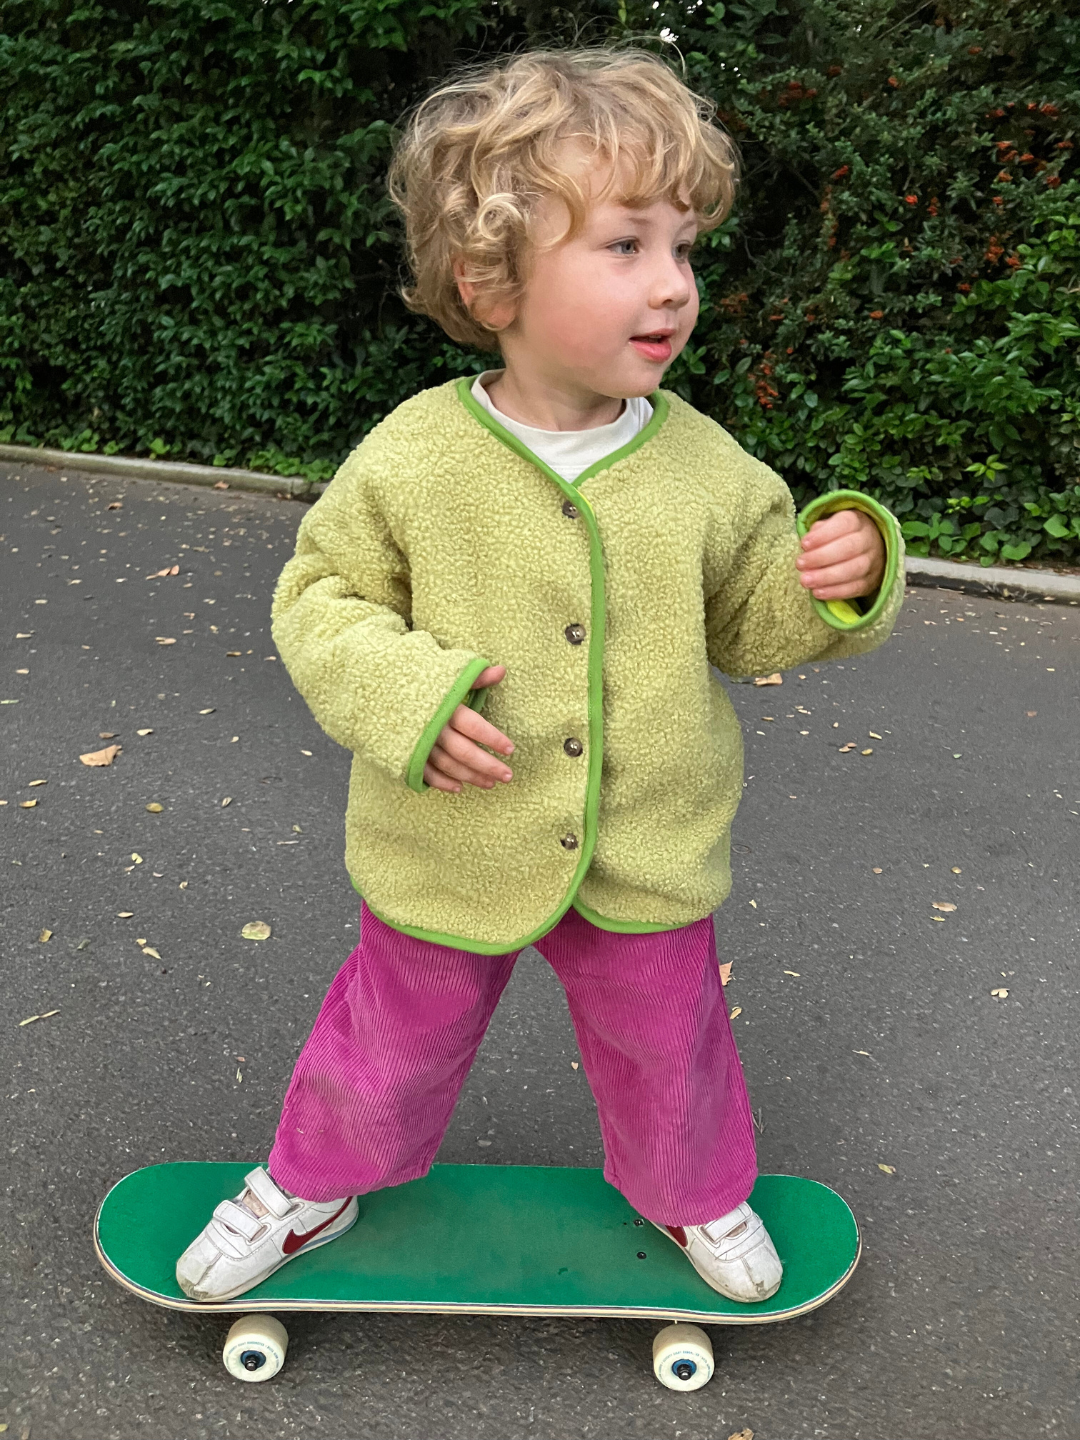 Child standing on a skateboard wearing magenta corduroy pants and a green fleece jacket, with a green hedge behind him, on a grey pavement.